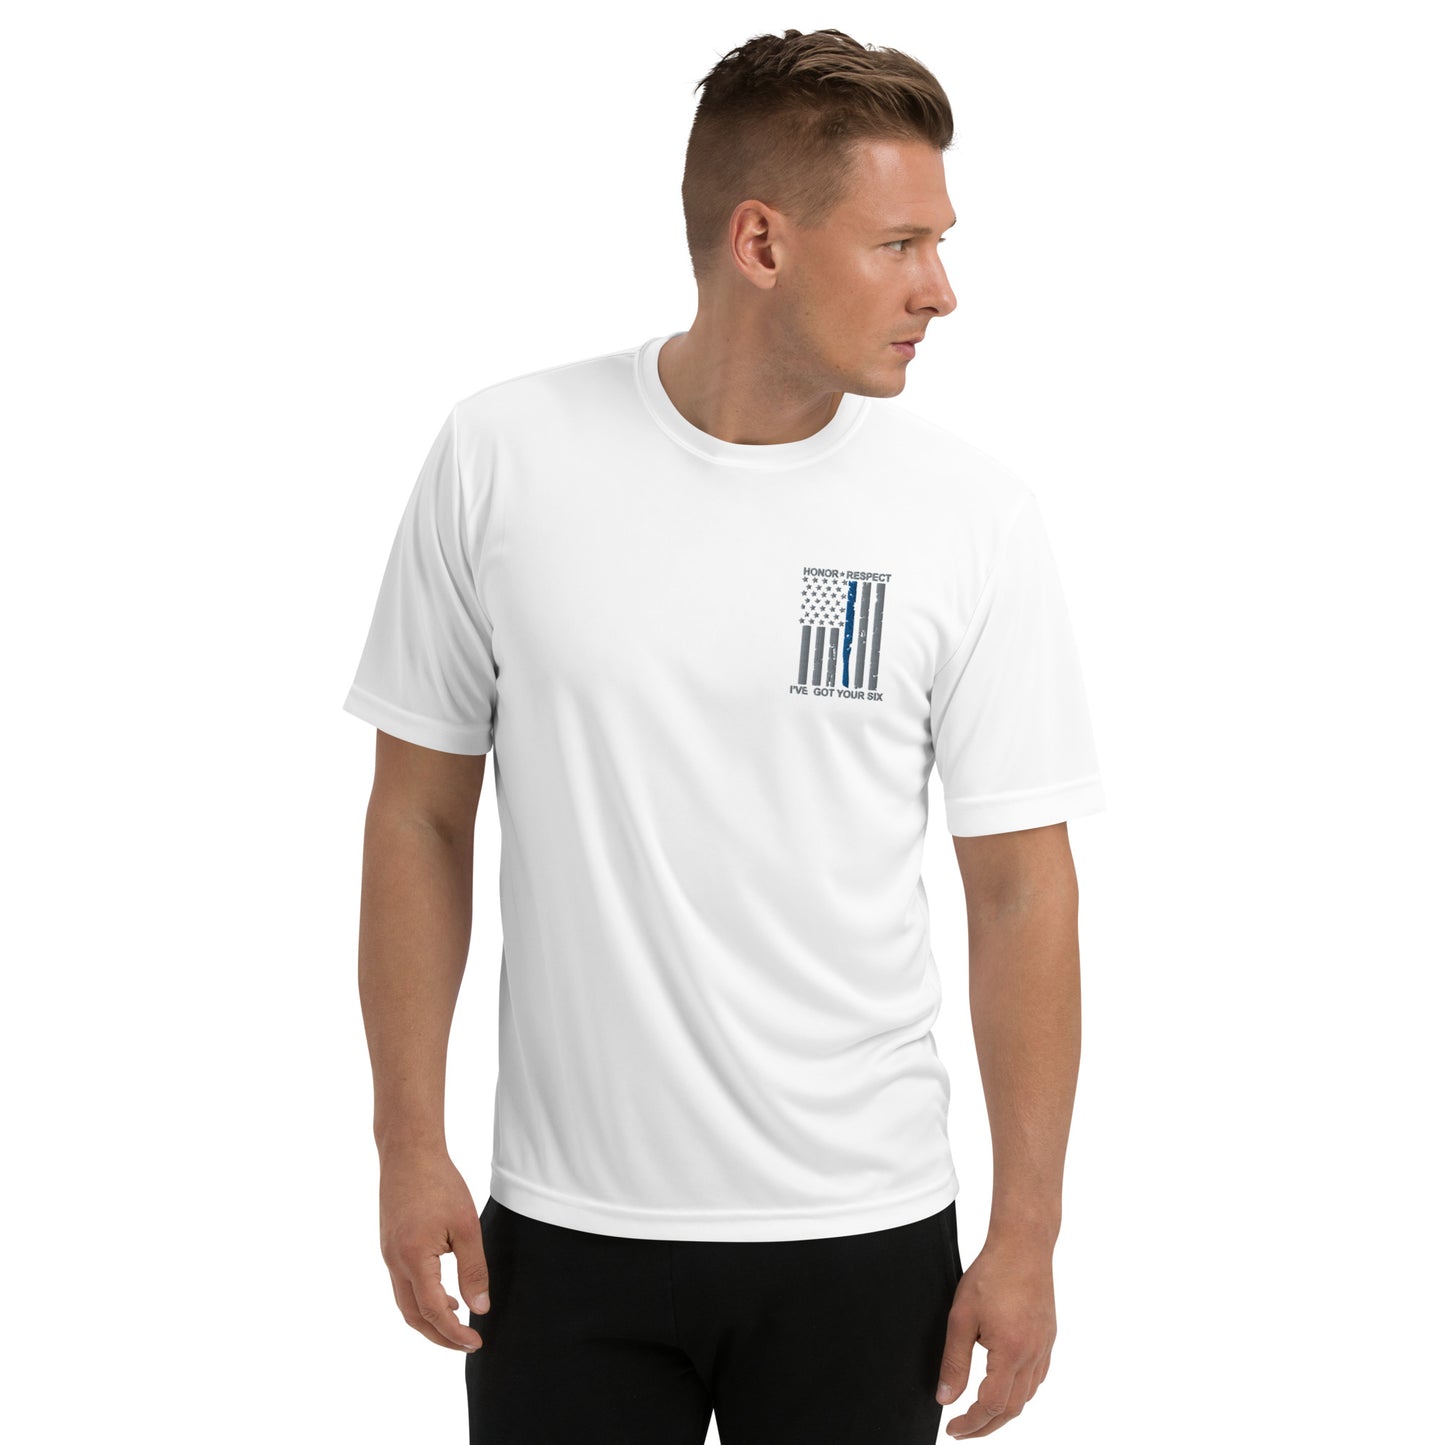 Honor And Respect, I've Got Your Six Sport Tec Moisture Wicking T Shirt